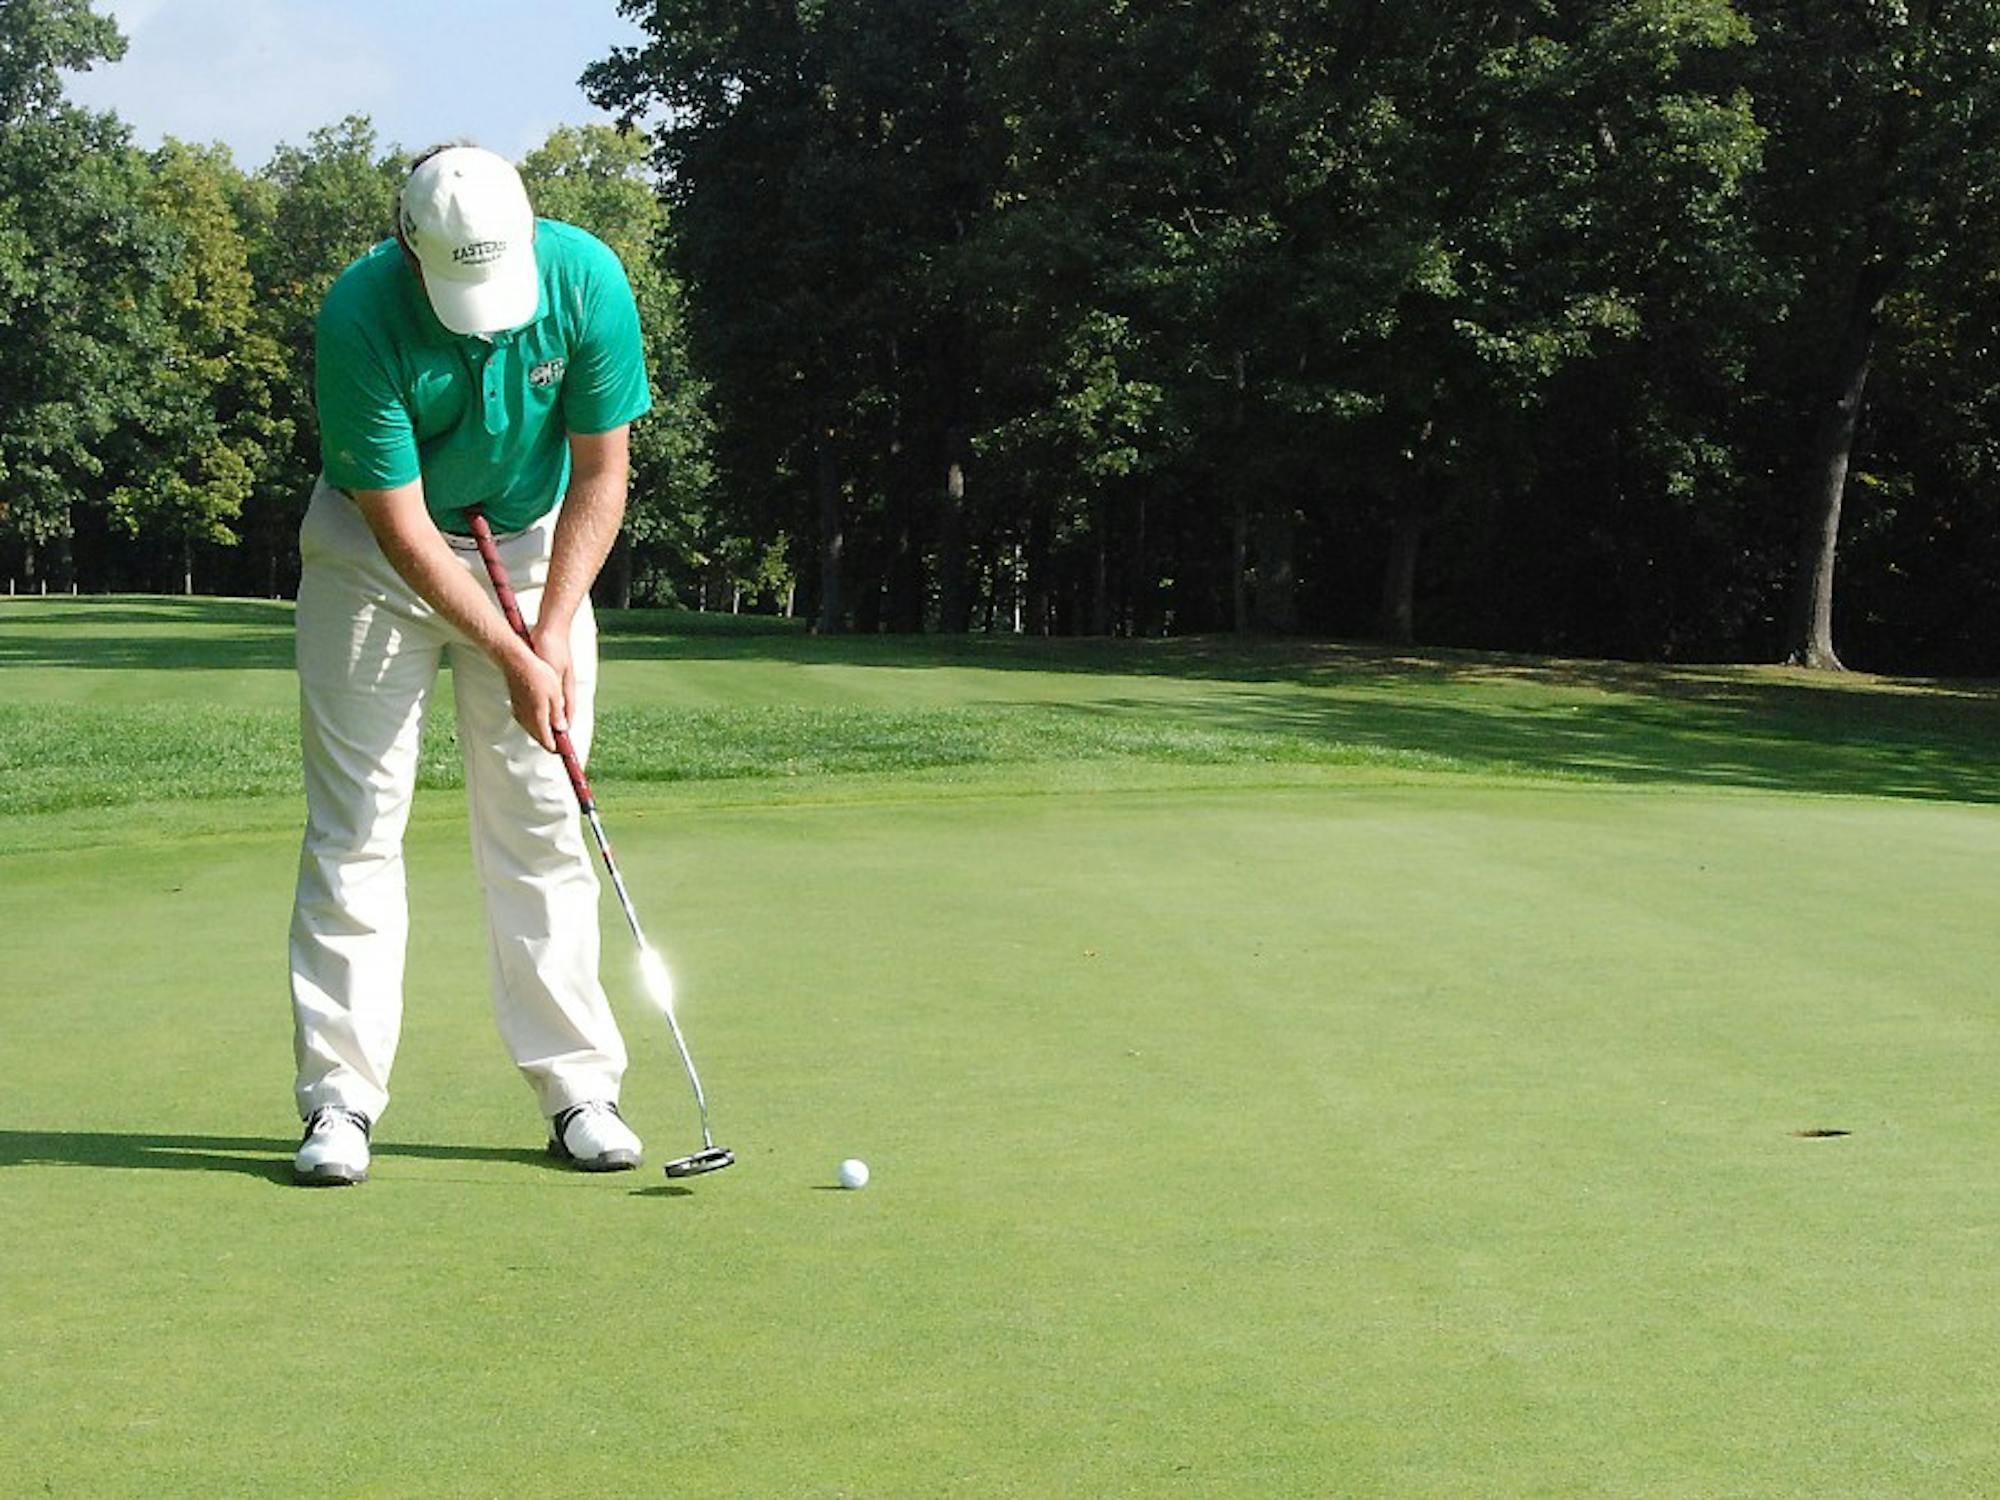 Marty Jeppesen putts Sunday at Radrick Farms.  He shot 72 in the final round of The Wolverine tournament.